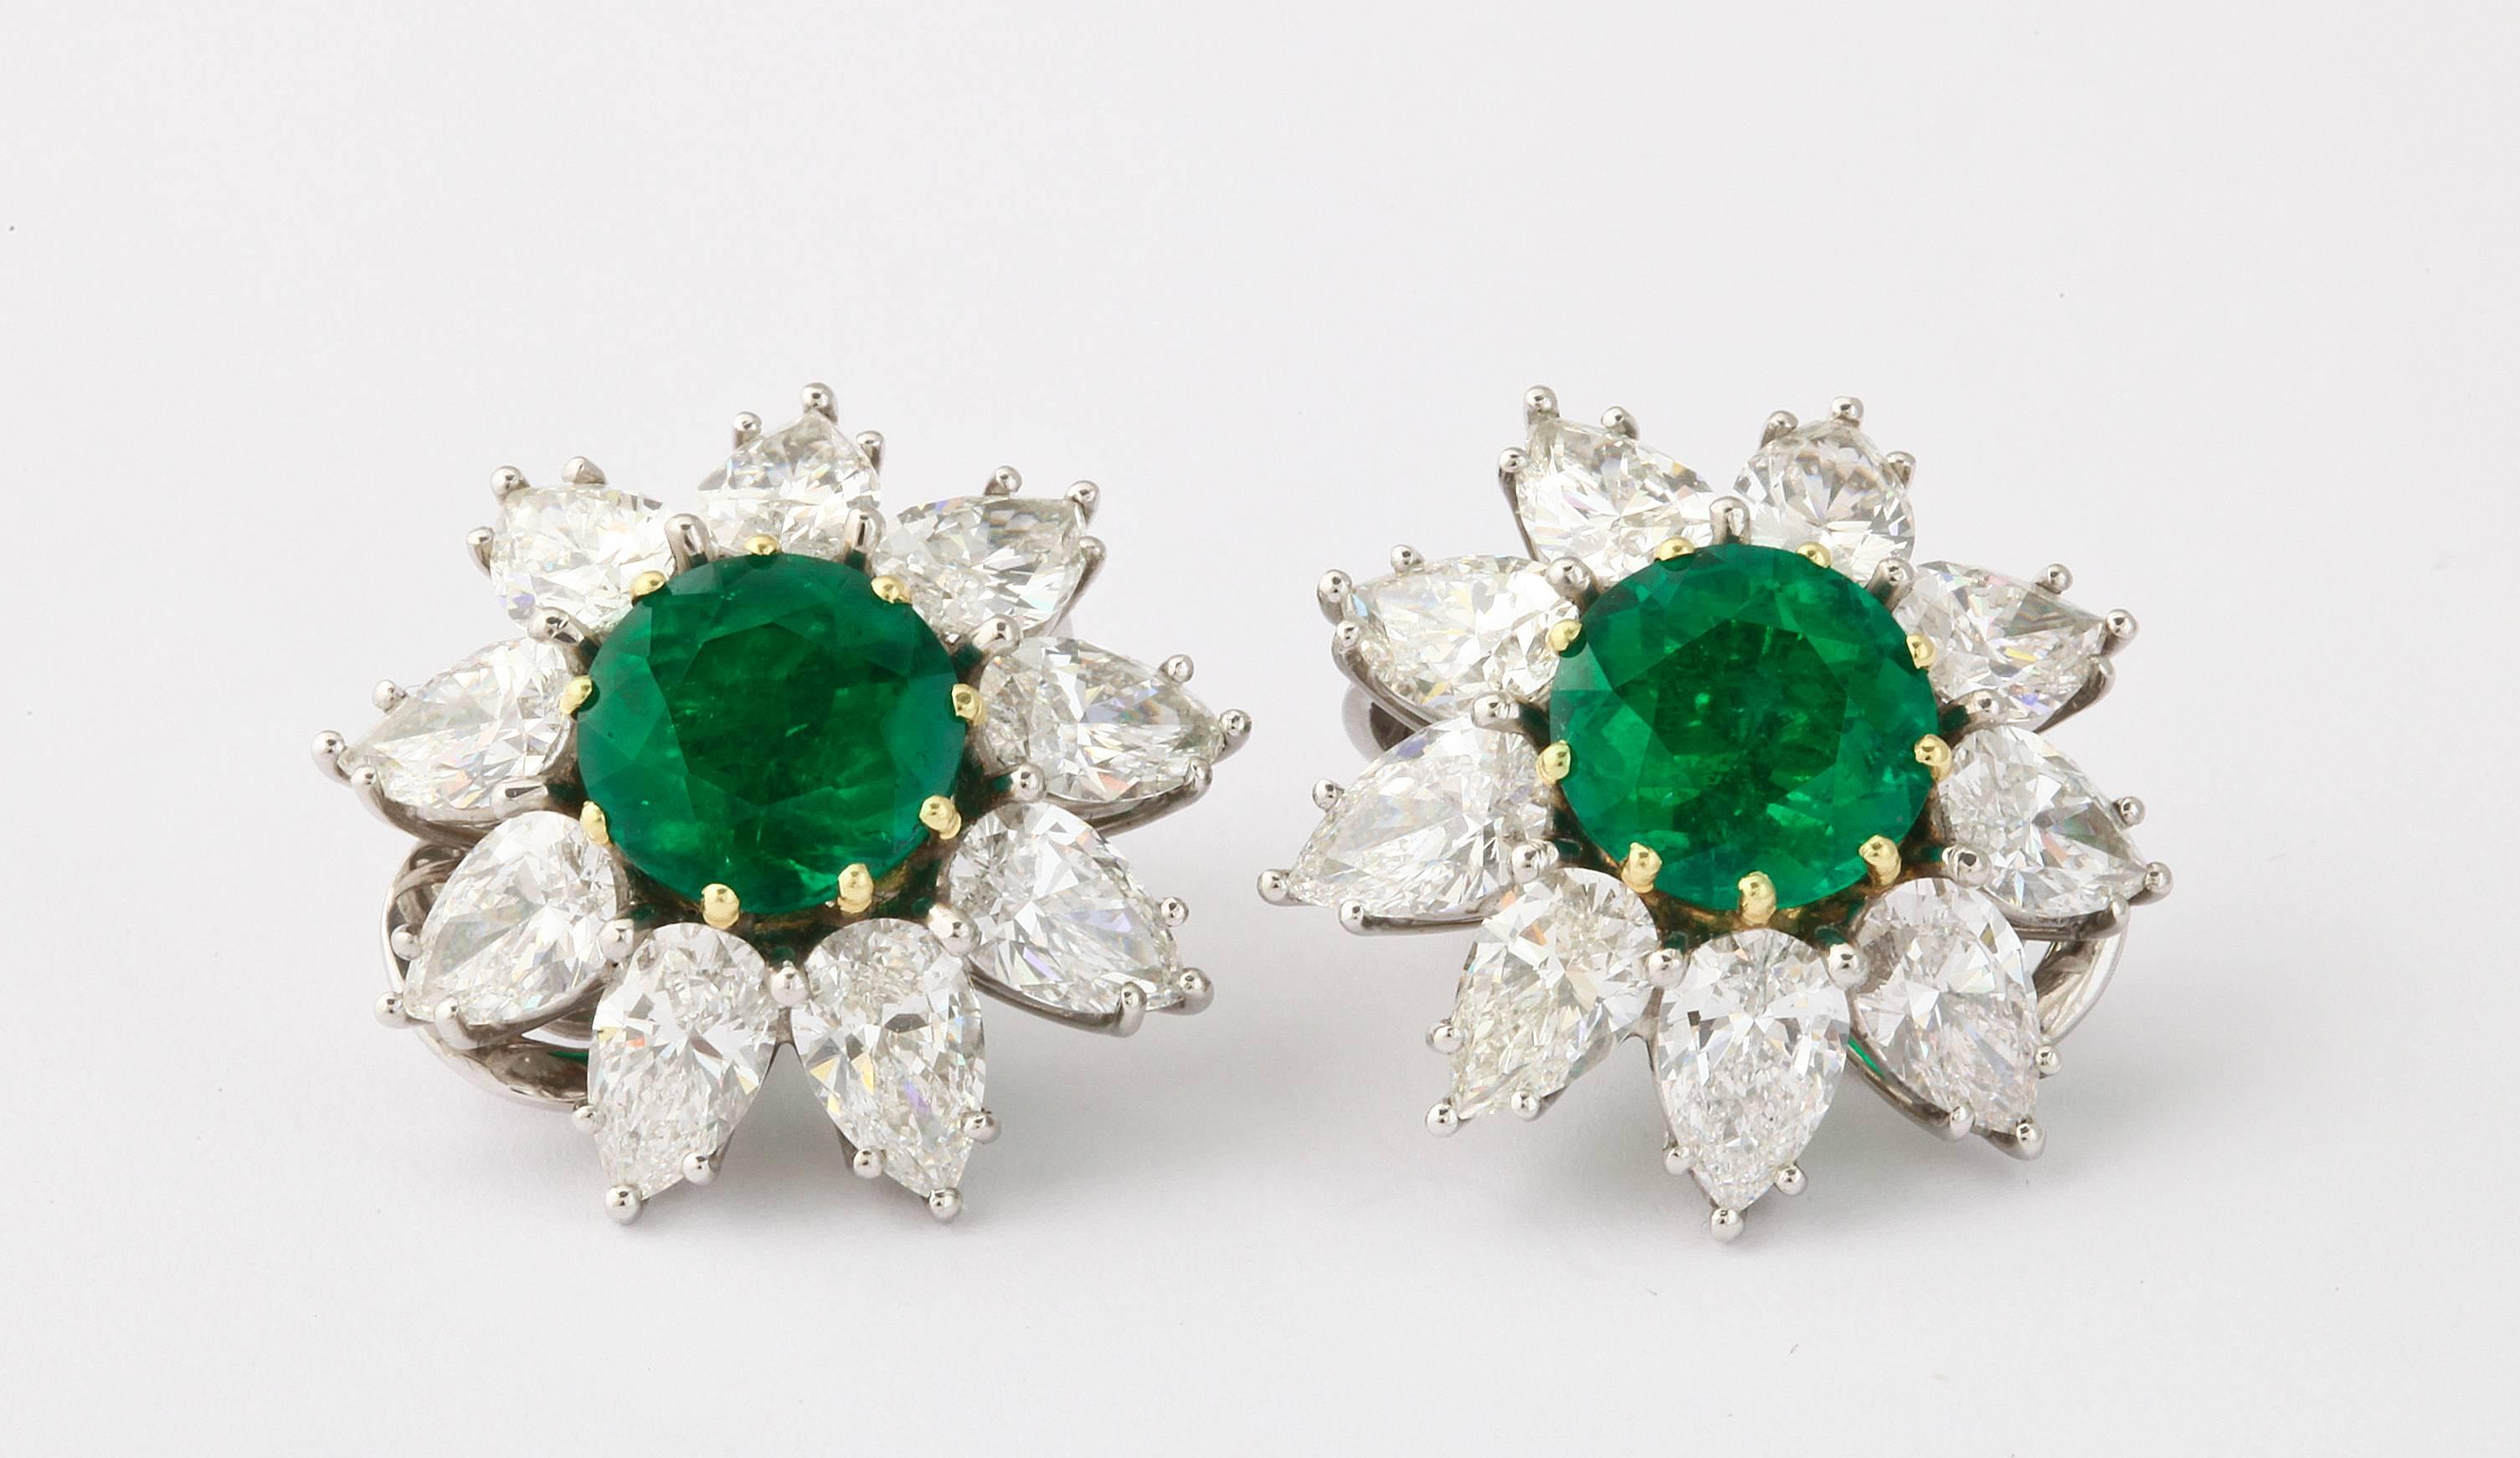 Gem quality round Colombian emeralds are already rare, but a perfectly matched pair is a true find.  Both stones (2.20cts & 2.25cts) are certificated and of Colombian origin, with minor and insignificant amounts of oil which is a traditional